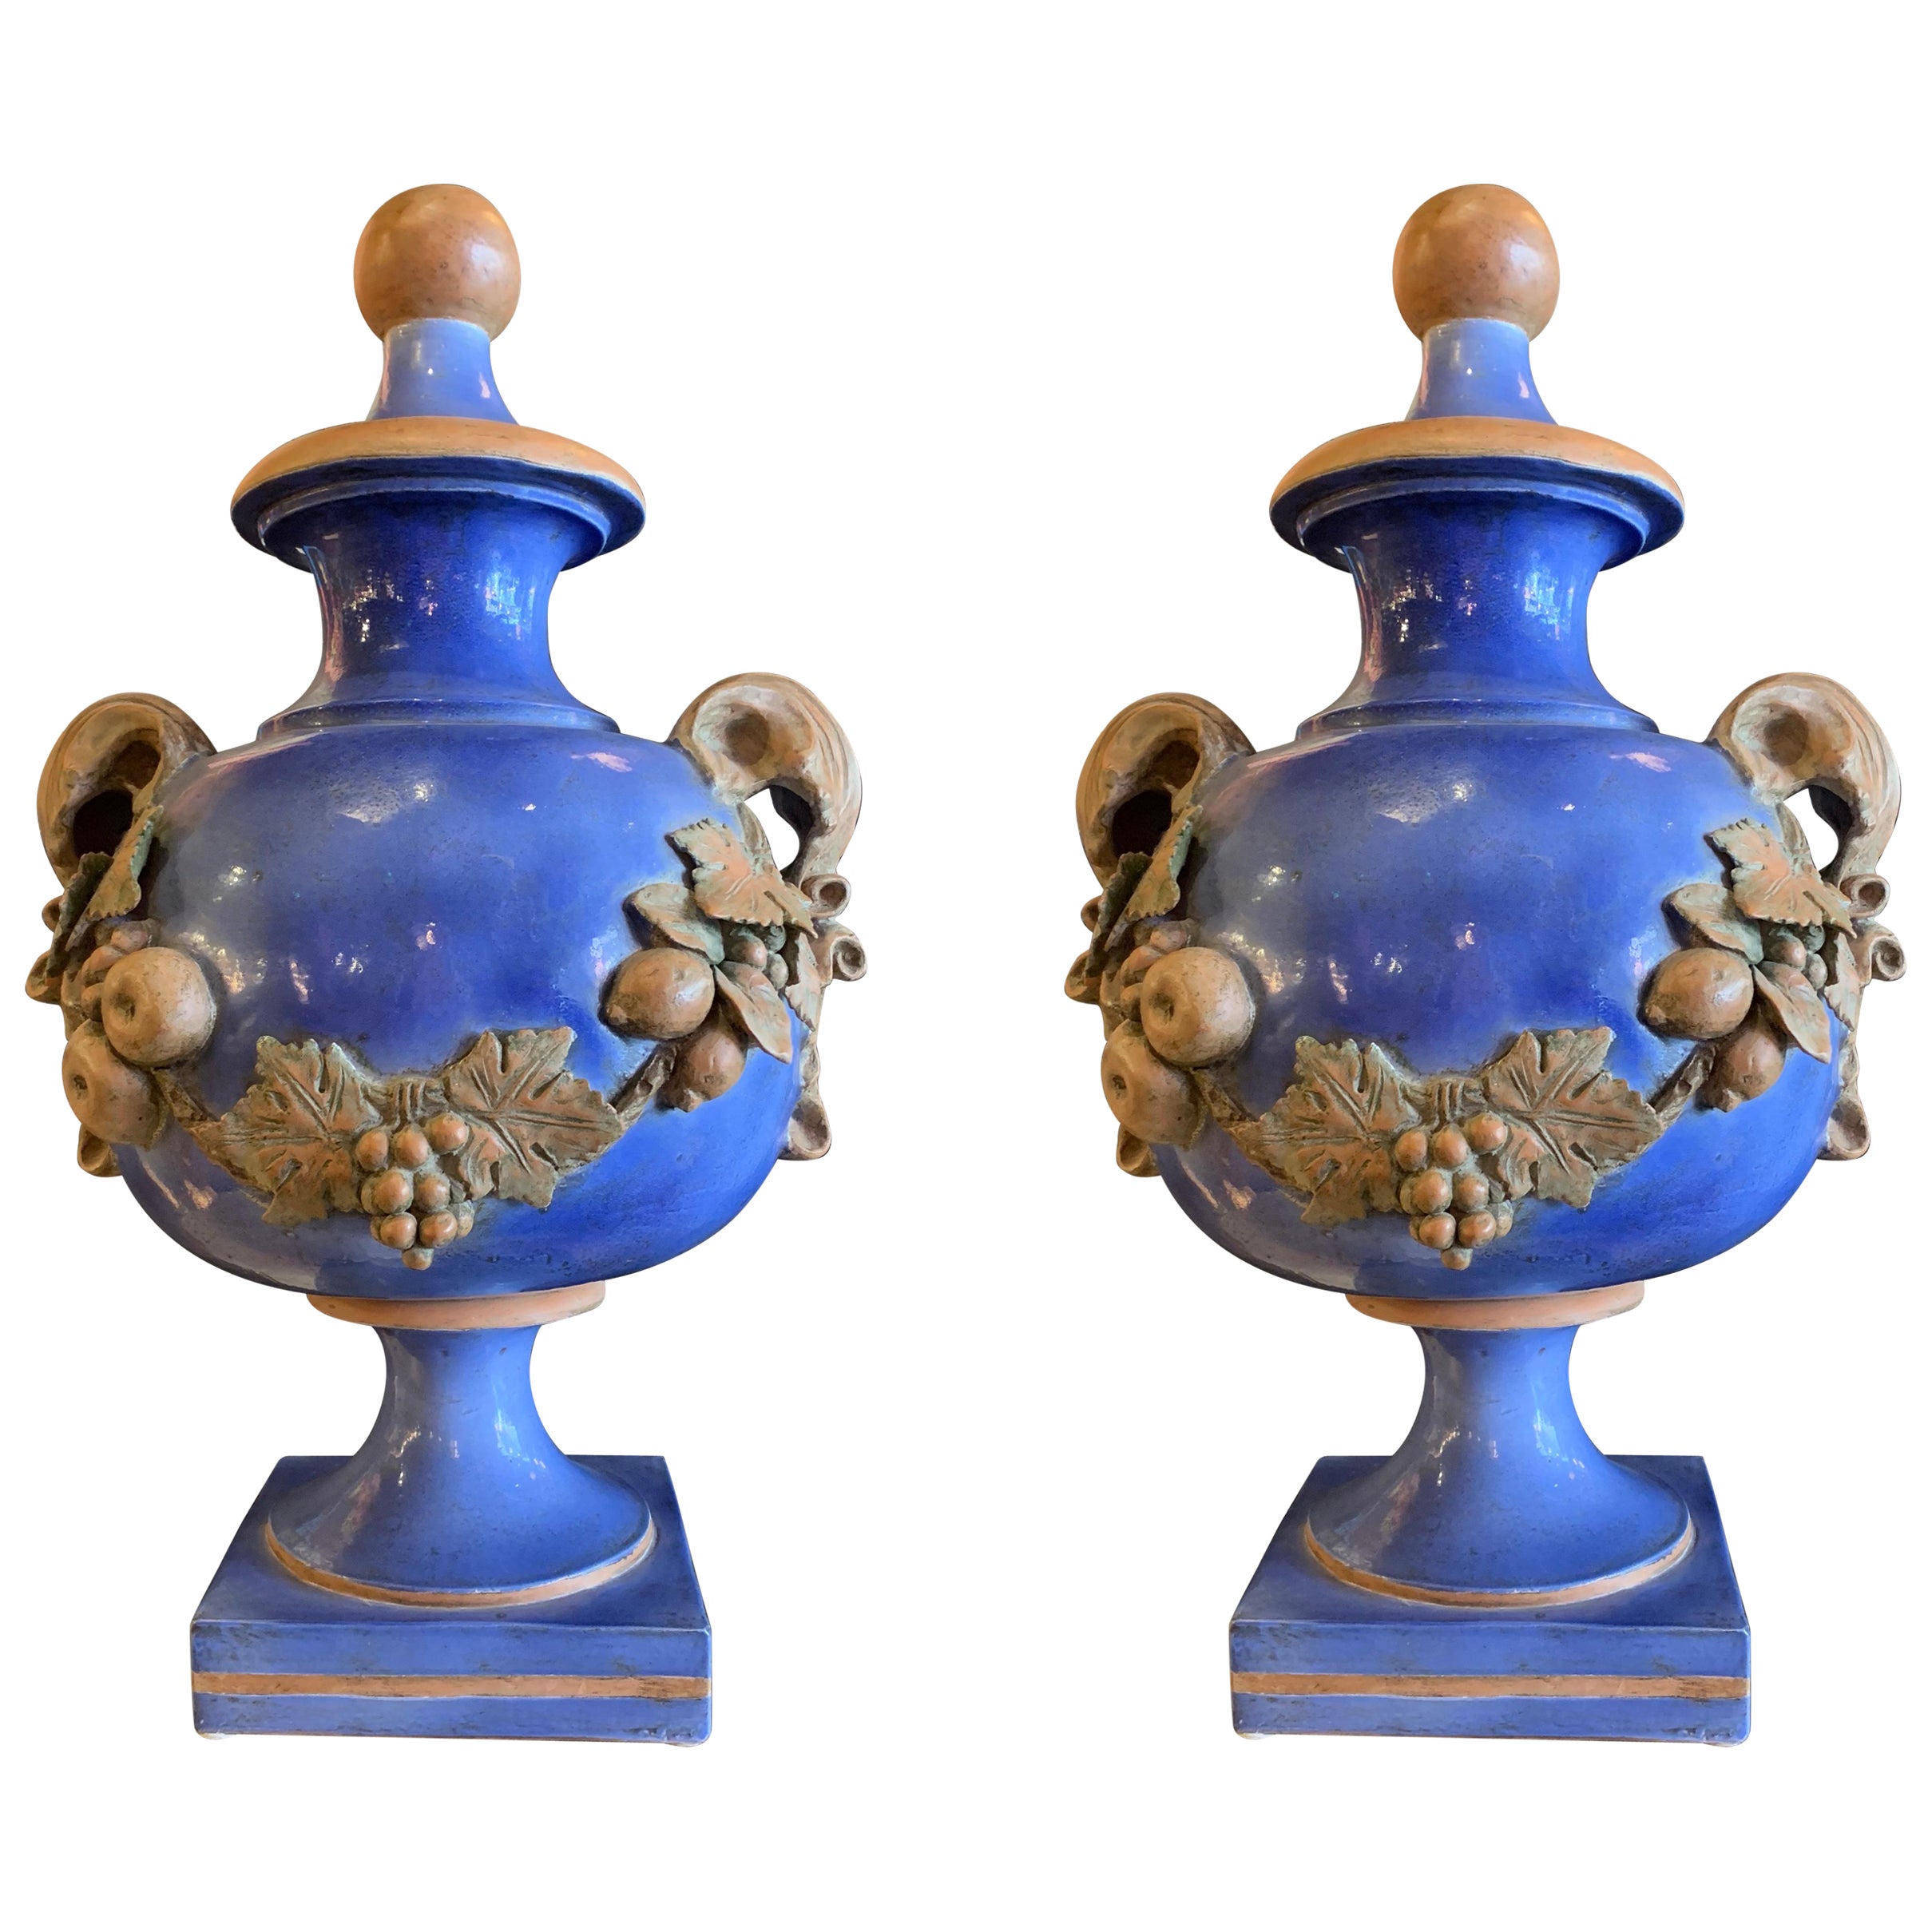 Large 1990s Blue Glaze Ceccarelli Italian Lidded Urns with Applied Fruit, a Pair For Sale